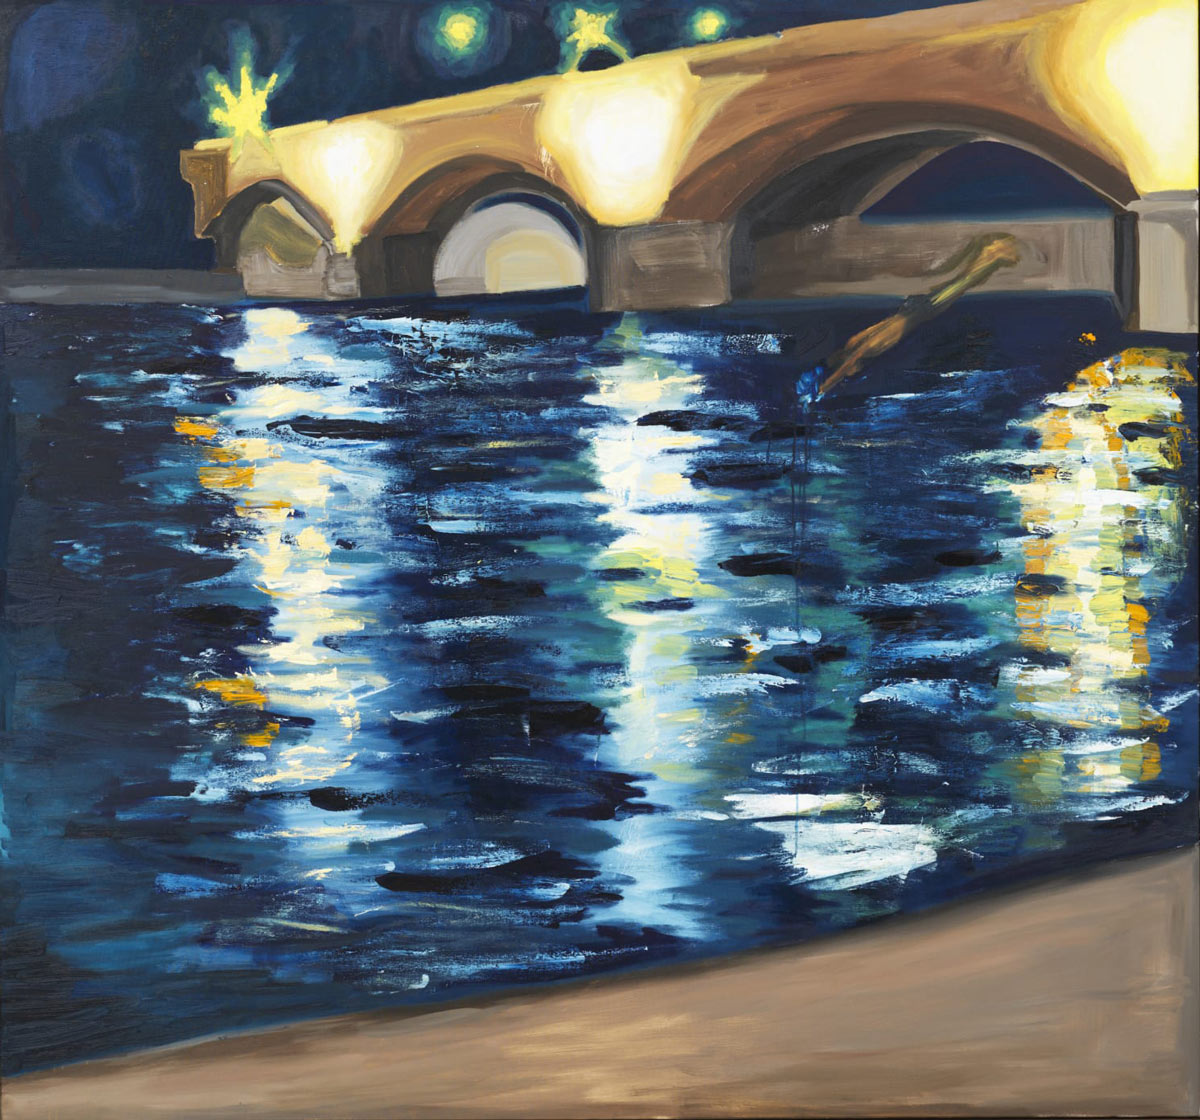 Jerrell Gibbs, Nous Visited the Seine, But Did Not Swim, 2022. Oil on canvas, 72 1/2 x 77 1/2 x 2 3/8 in.